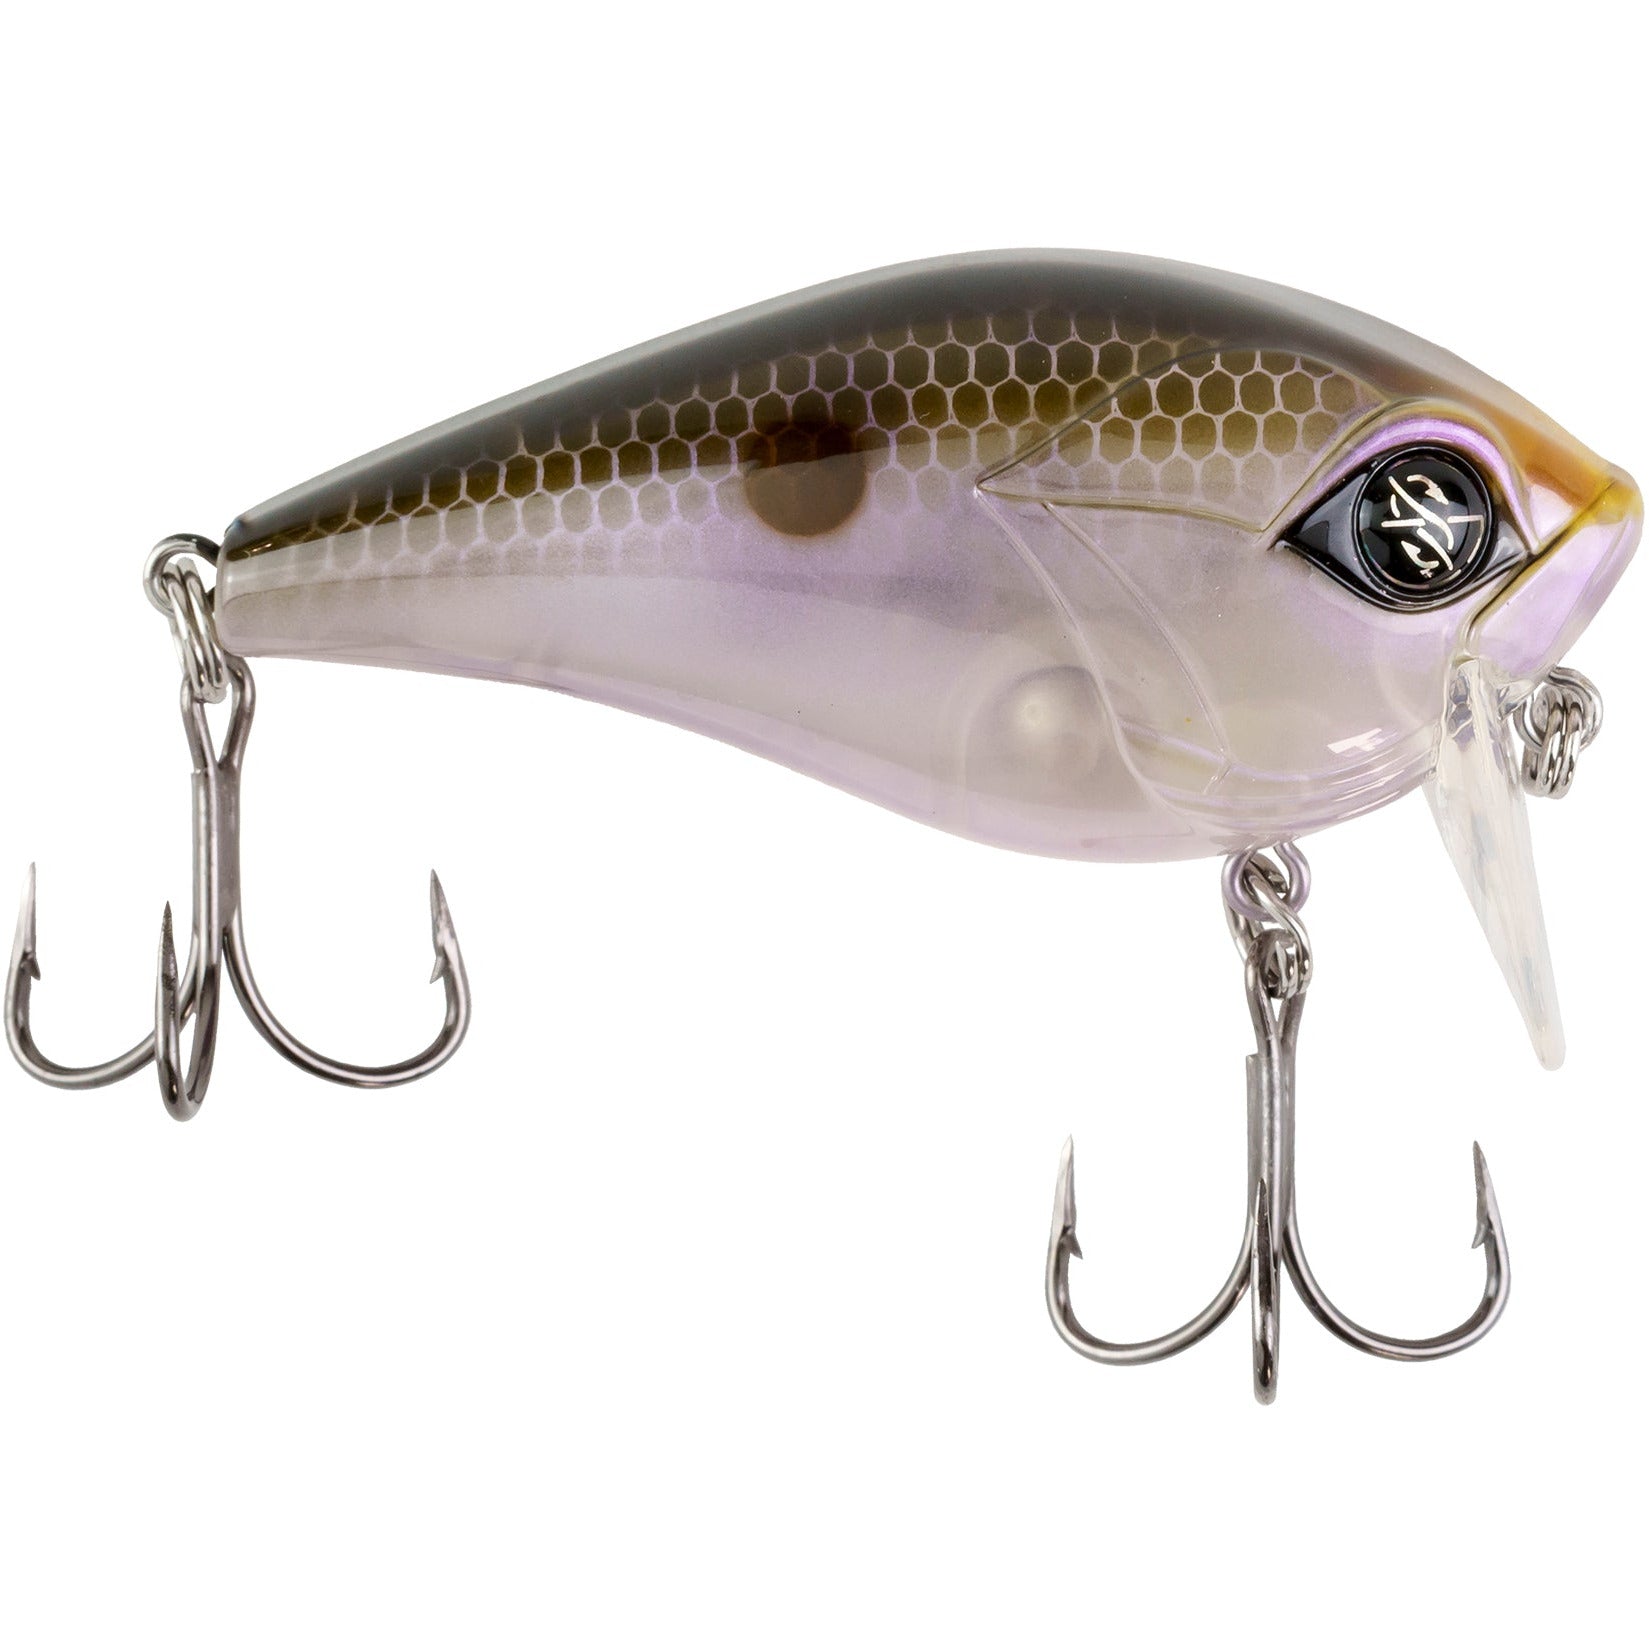 Googan Soft Bait Smelly NEW Pick and Choose Bass Fishing $3.99